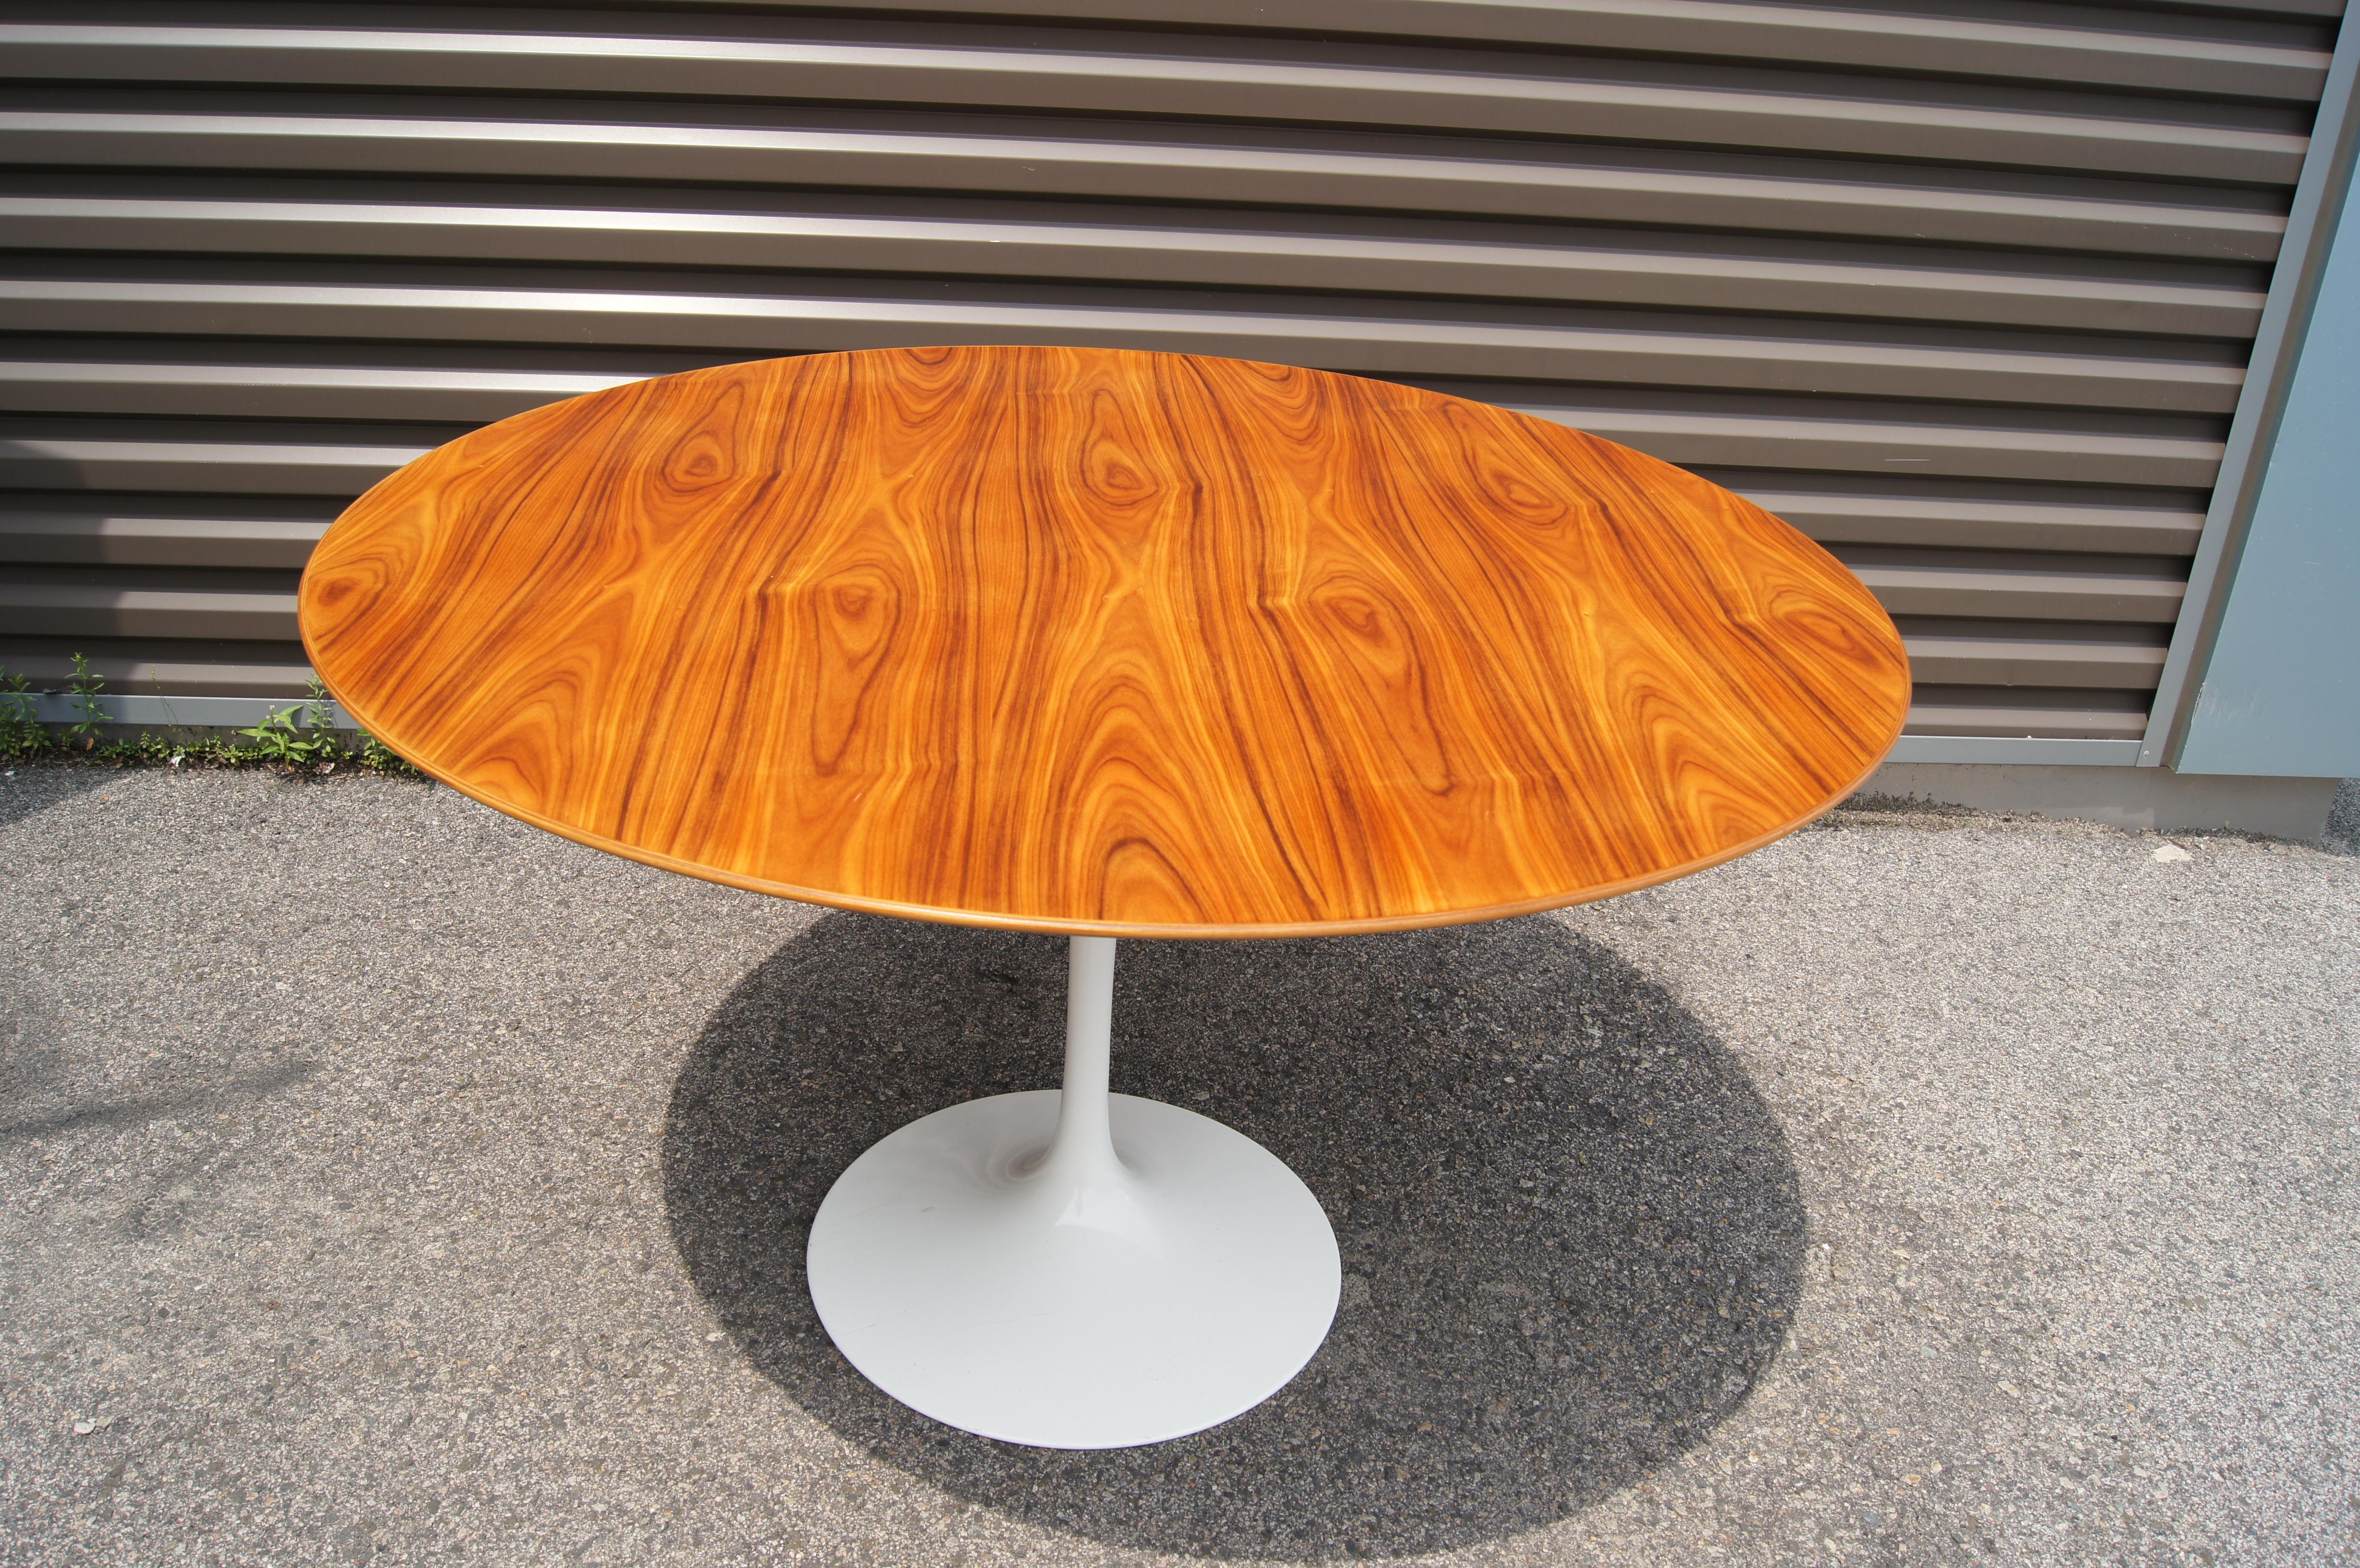 This iteration of Eero Saarinen's 1957 pedestal dining table, a modernist classic, features a round walnut top on a white cast aluminum base. The 47-inch diameter seats up to six people.

A later Knoll production from 2009, it has been newly